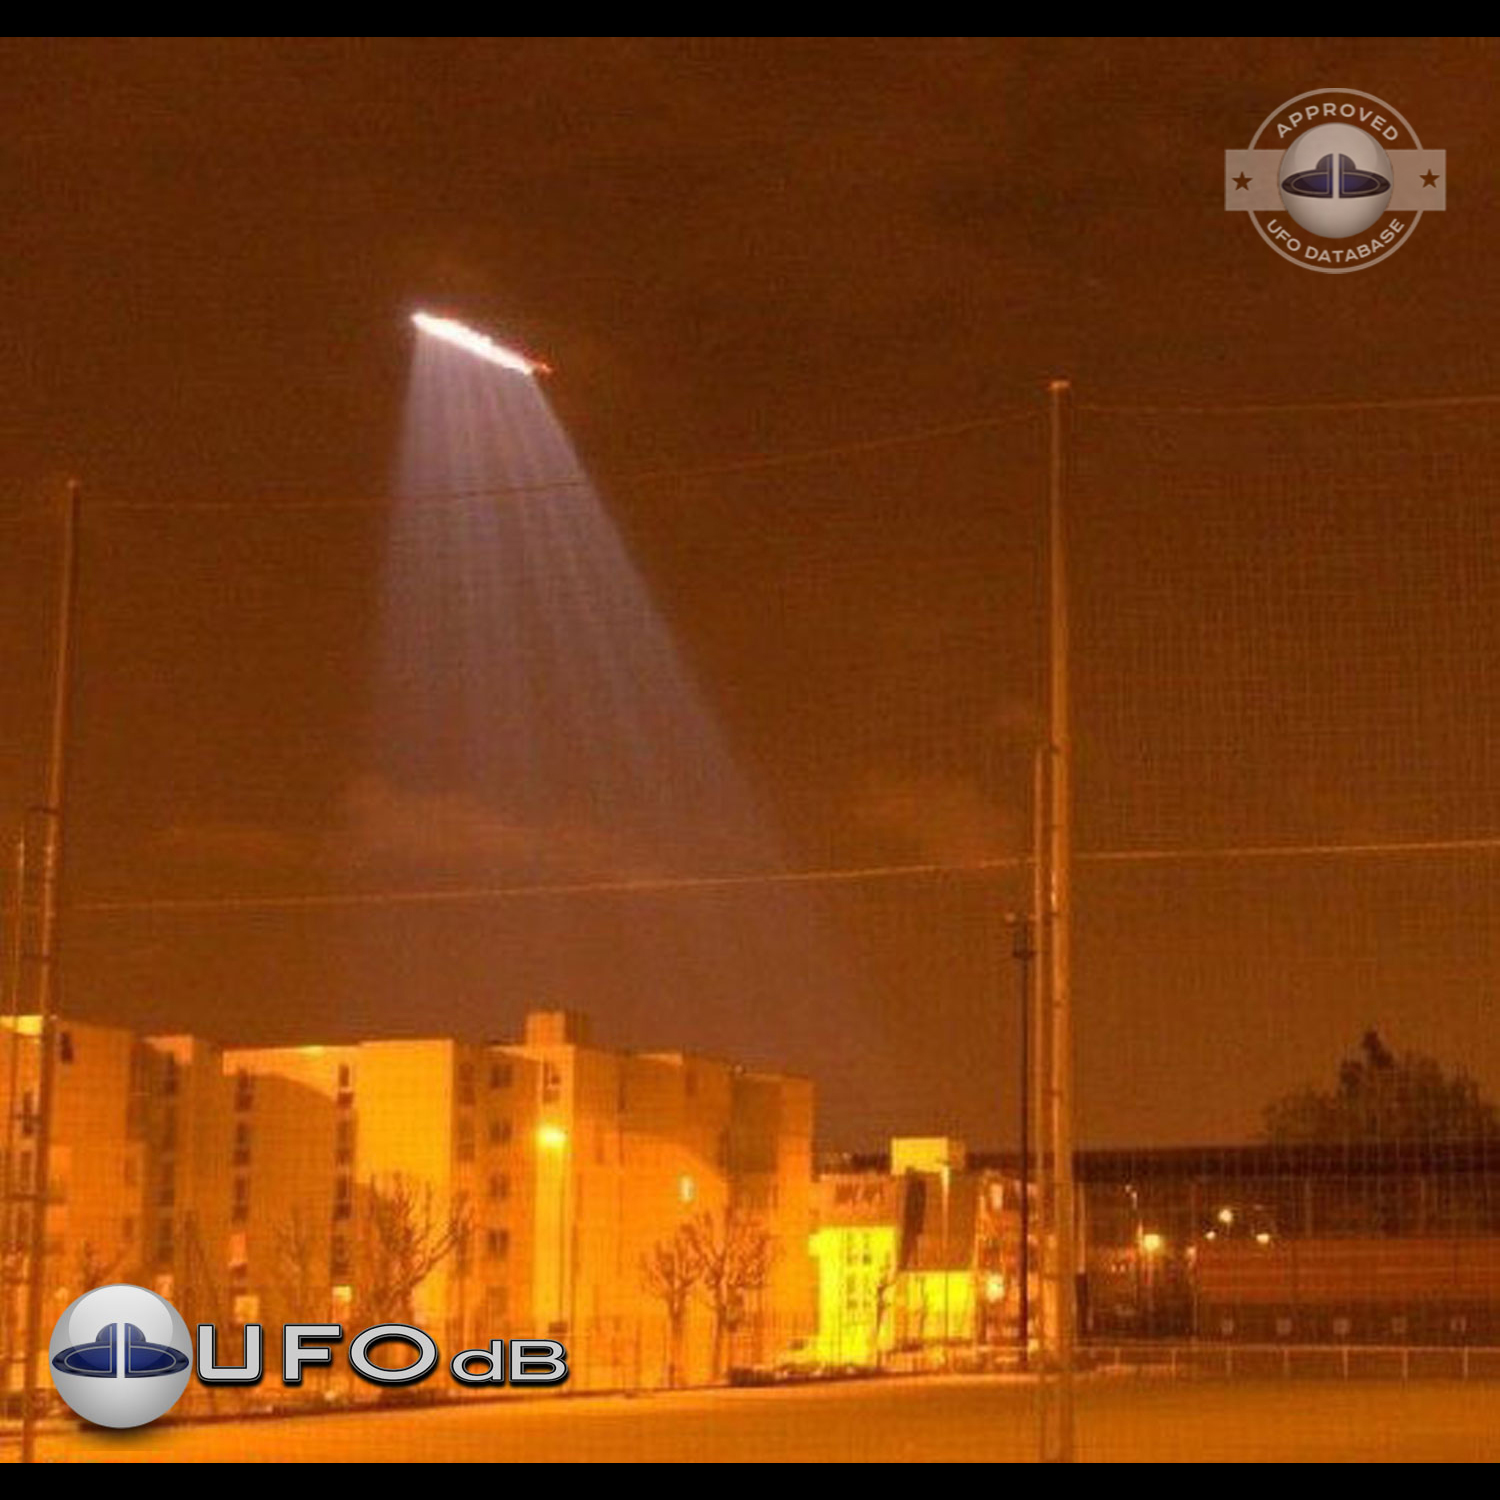 UFO sighted at 9 pm, causing the rerouting of flights to other cities UFO Picture #78-1